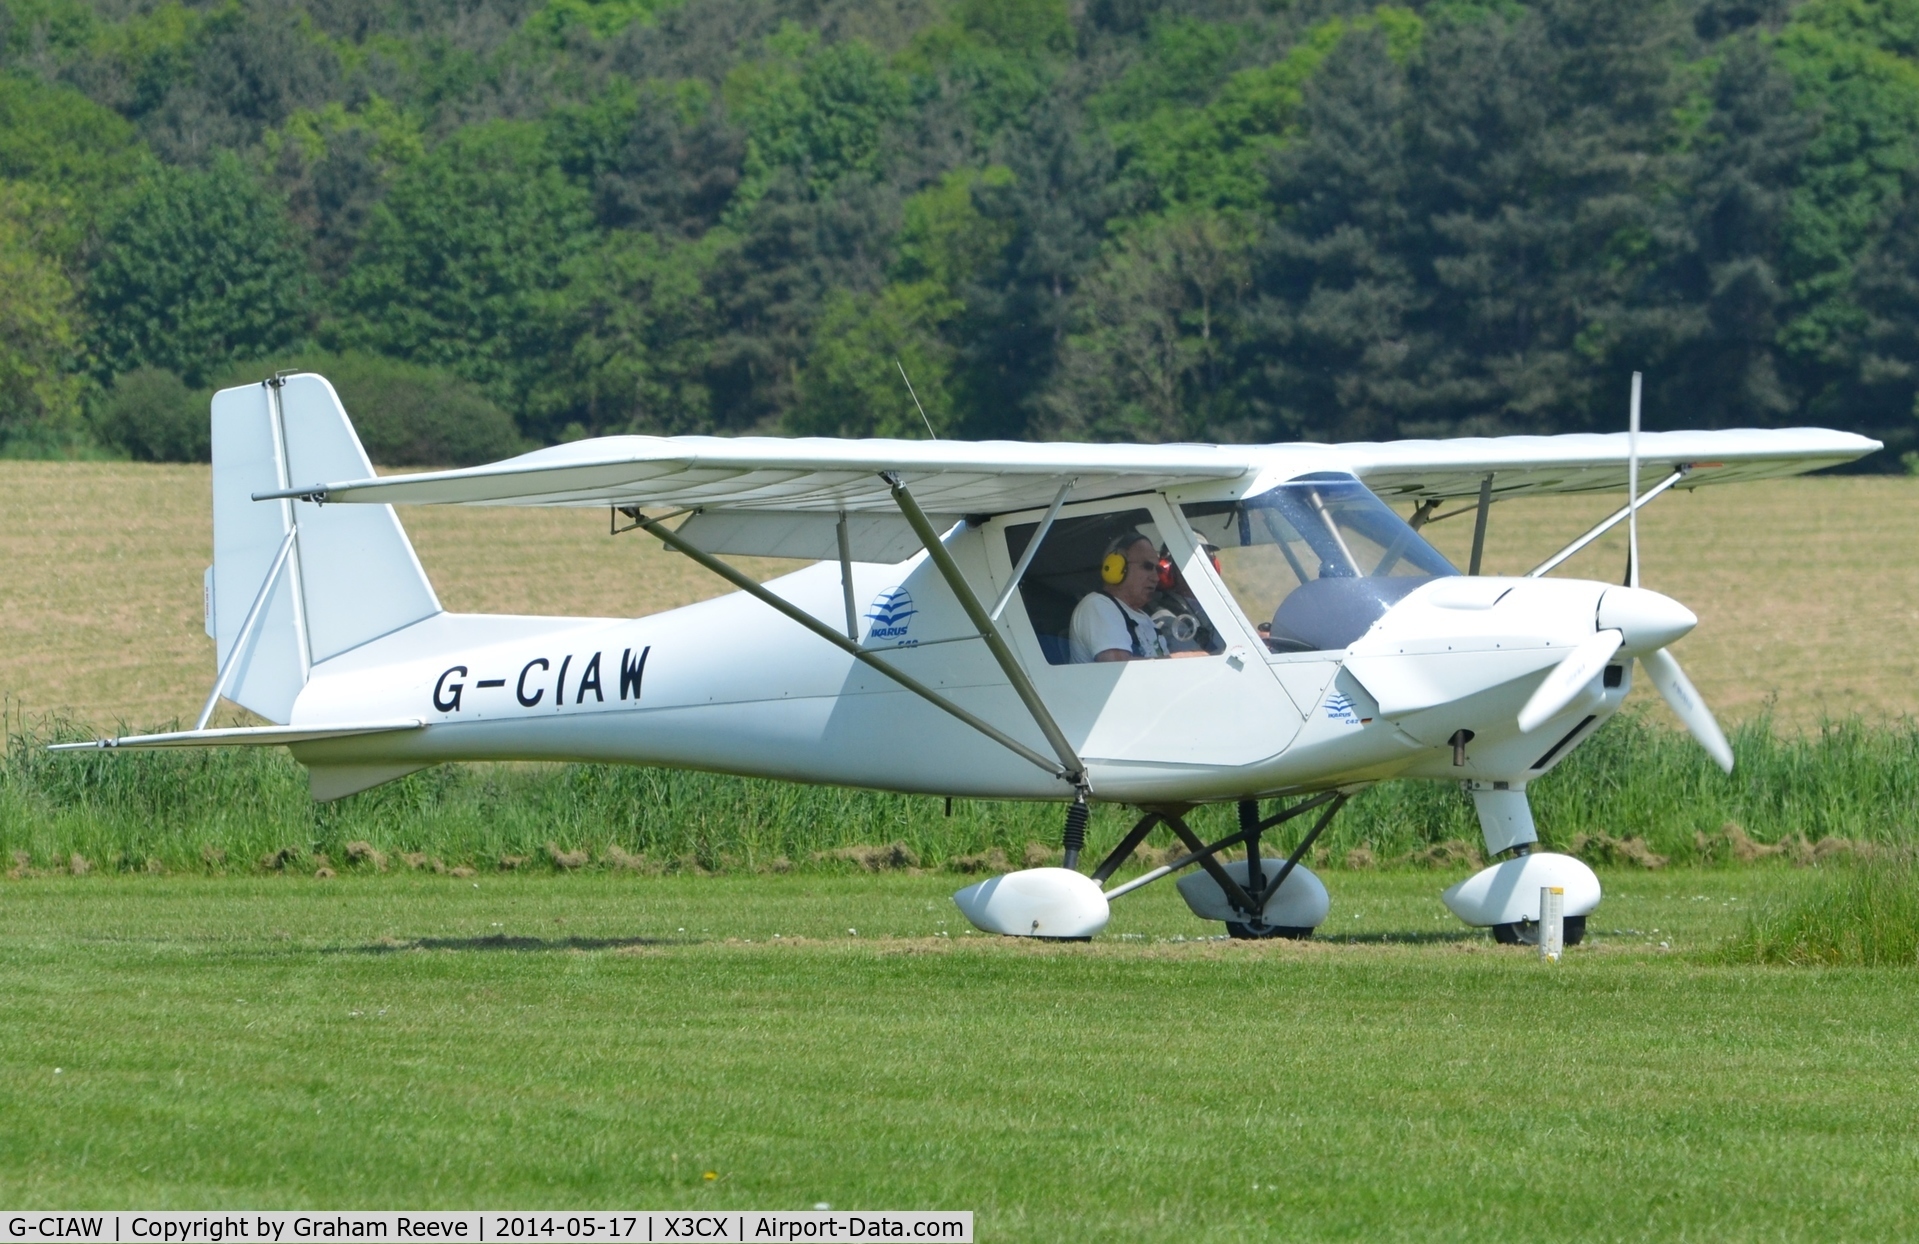 G-CIAW, 2013 Comco Ikarus C42 Cyclone FB80 C/N 1305-7252, Just landed at Northrepps.